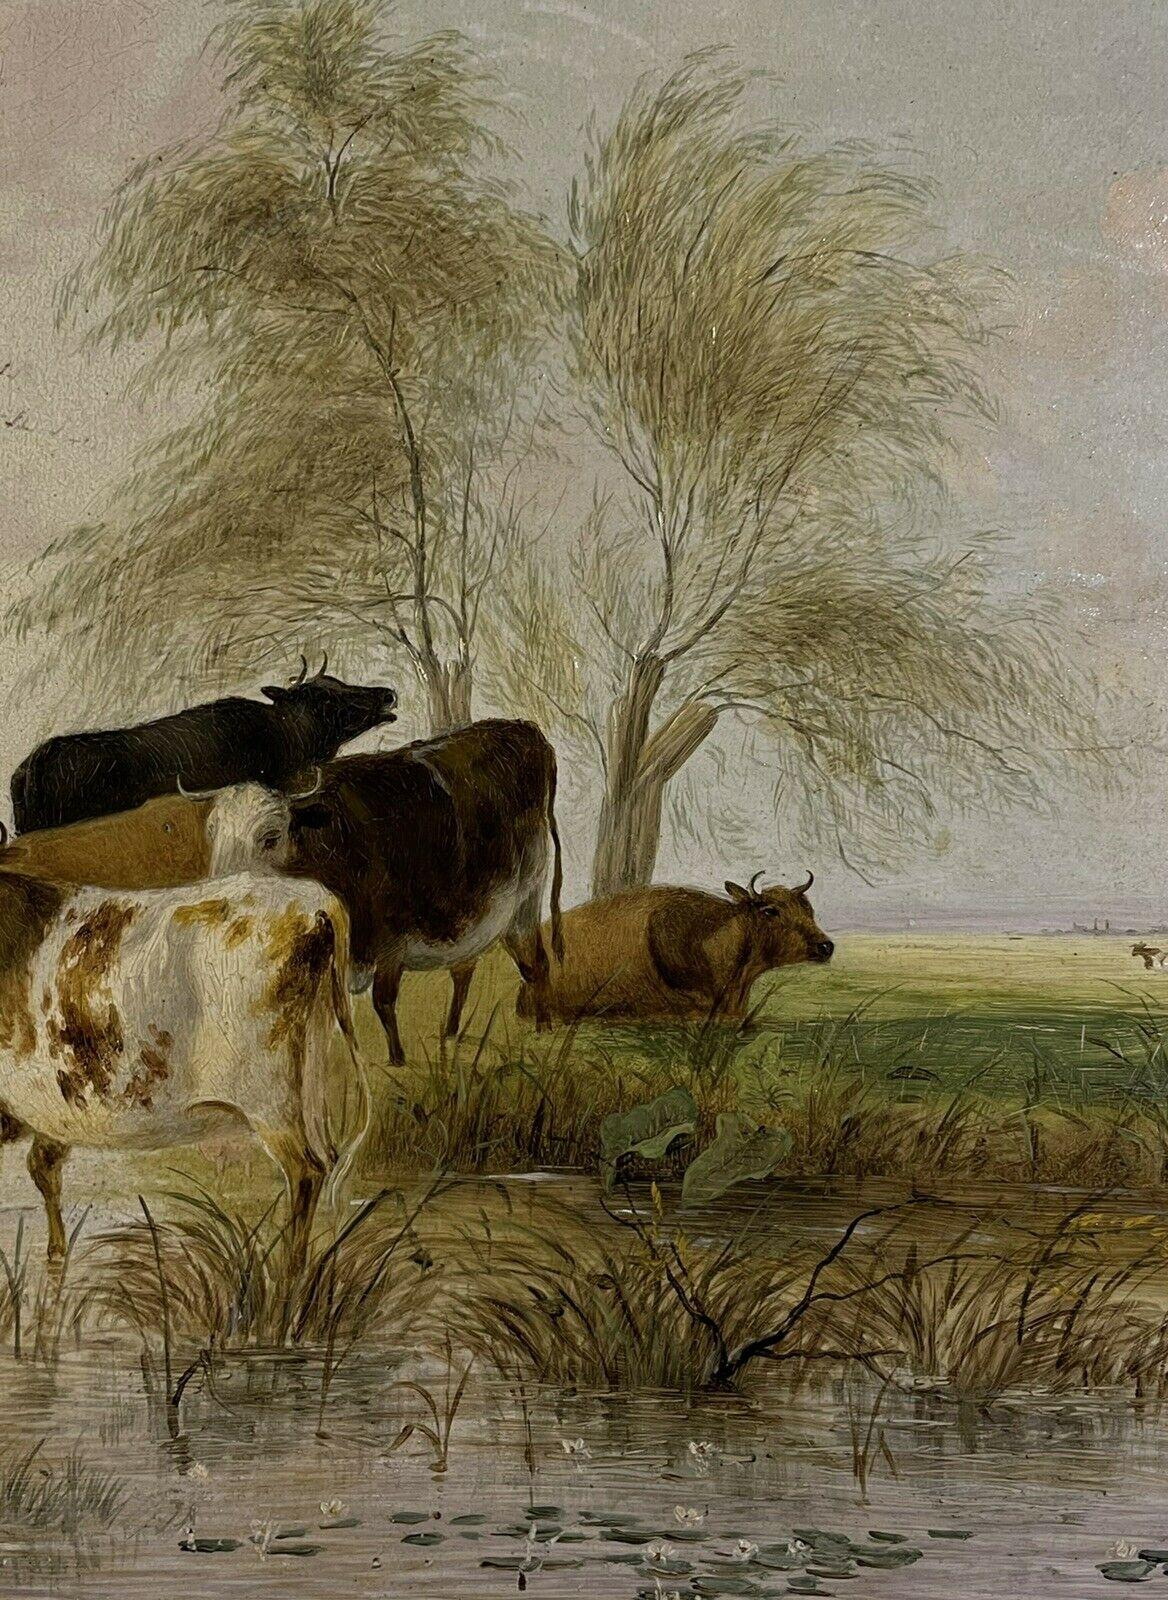 Artist/ School: Harry Pennell, British 19th century, signed lower corner

Title: Tranquil Pastures

Medium: signed oil painting on board, framed

Size:

framed:18 x 23.5 inches
board: 15.75 x 21 inches

Provenance: private collection, UK

Condition: